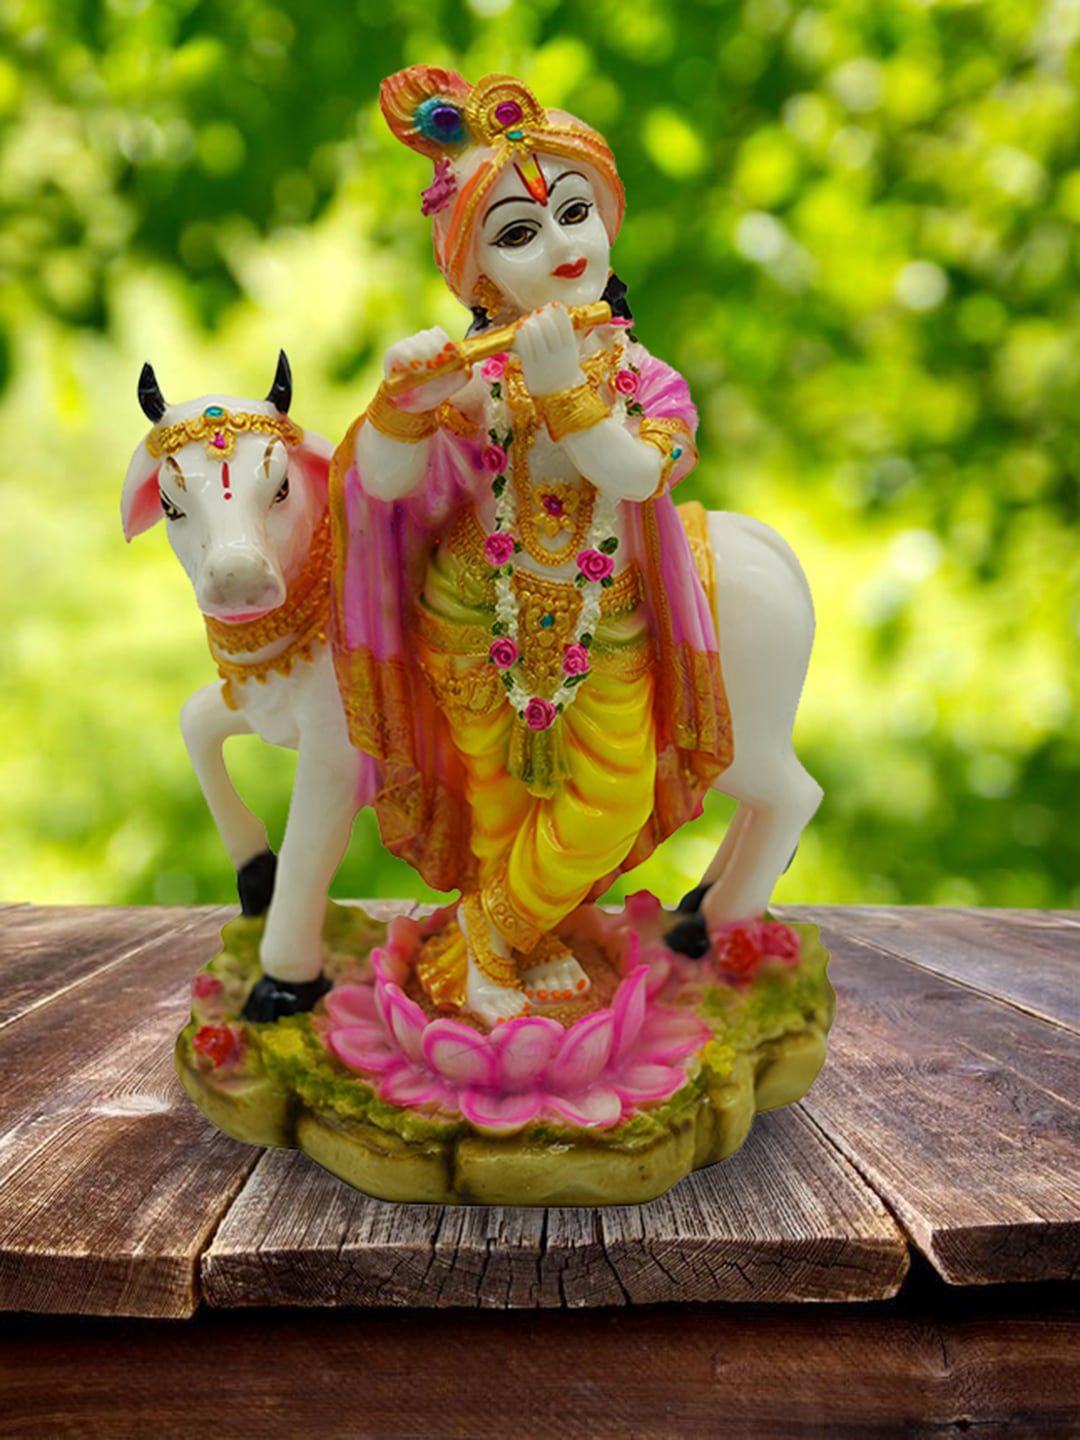 Gallery99 Yellow & White Hand-Painted Lord Krishna Idol With Nandi God Showpiece Price in India